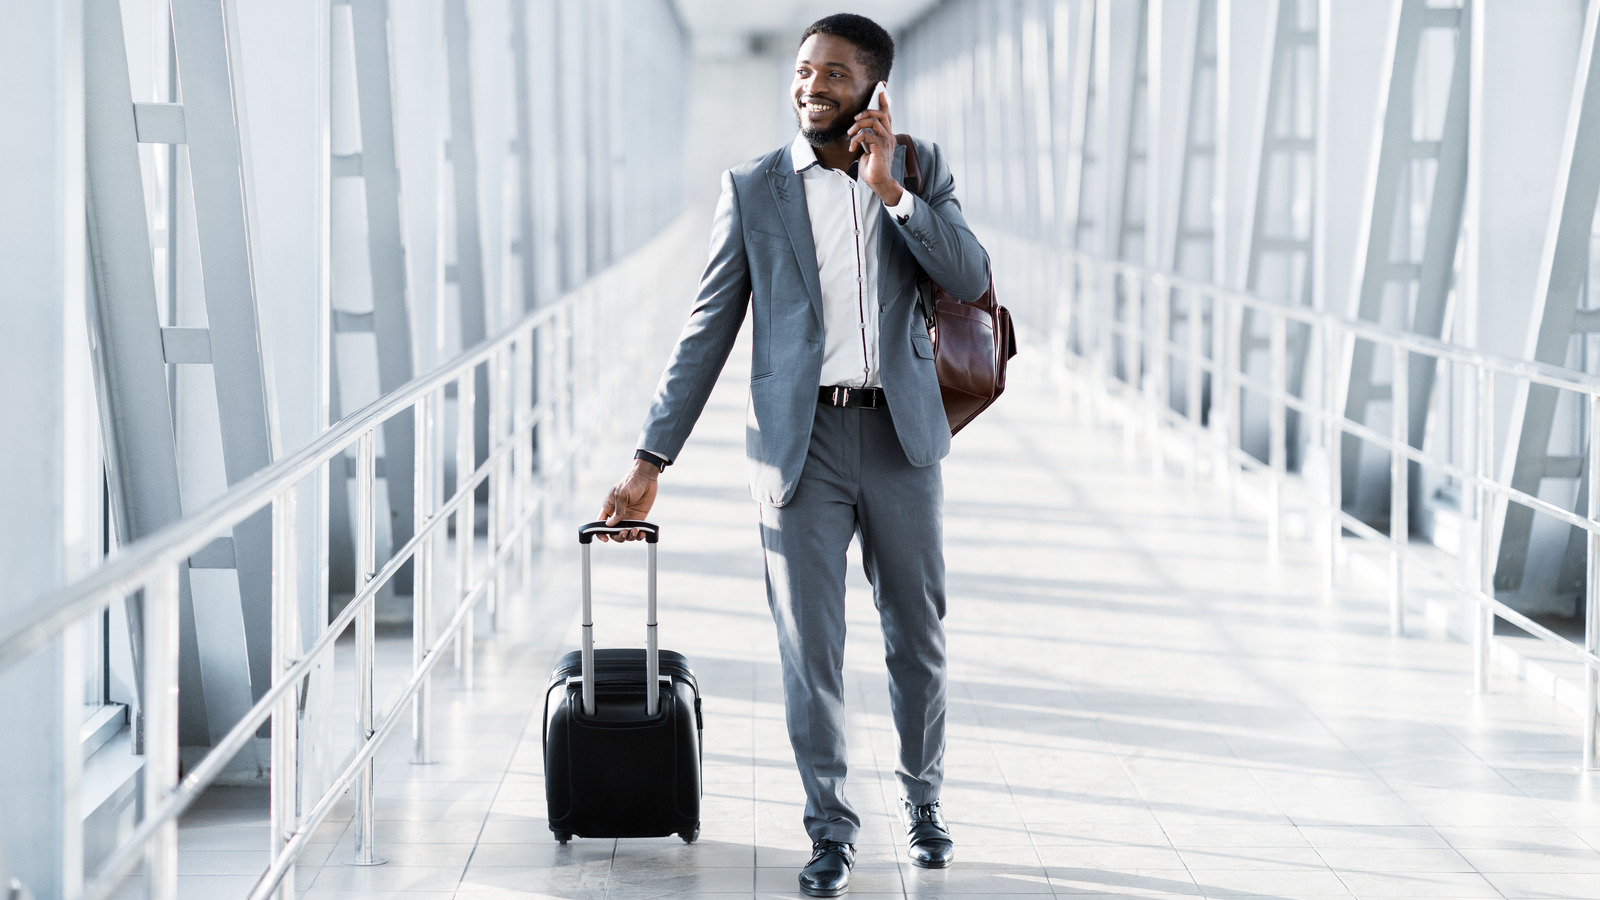 Carry-On vs. Personal Item: What's The Difference?